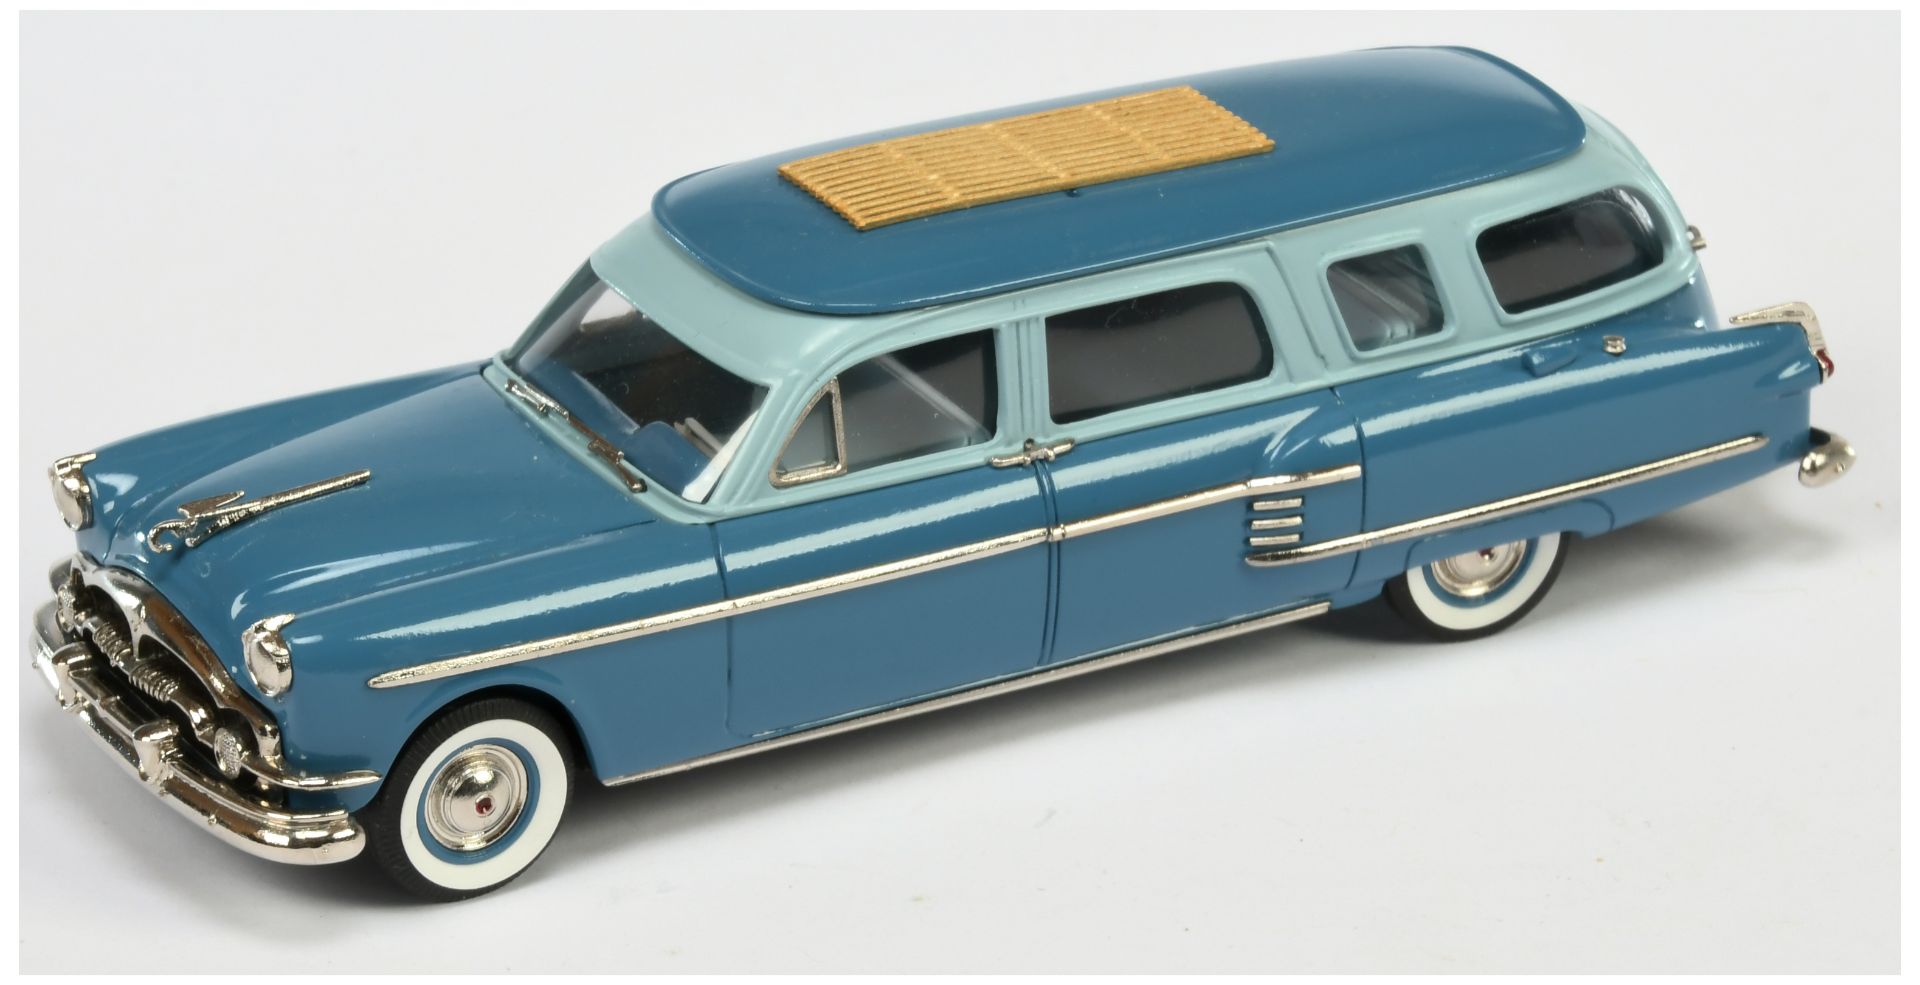 1954 Henney-Packard Super Station Wagon (two tone blue), BRK.190 -